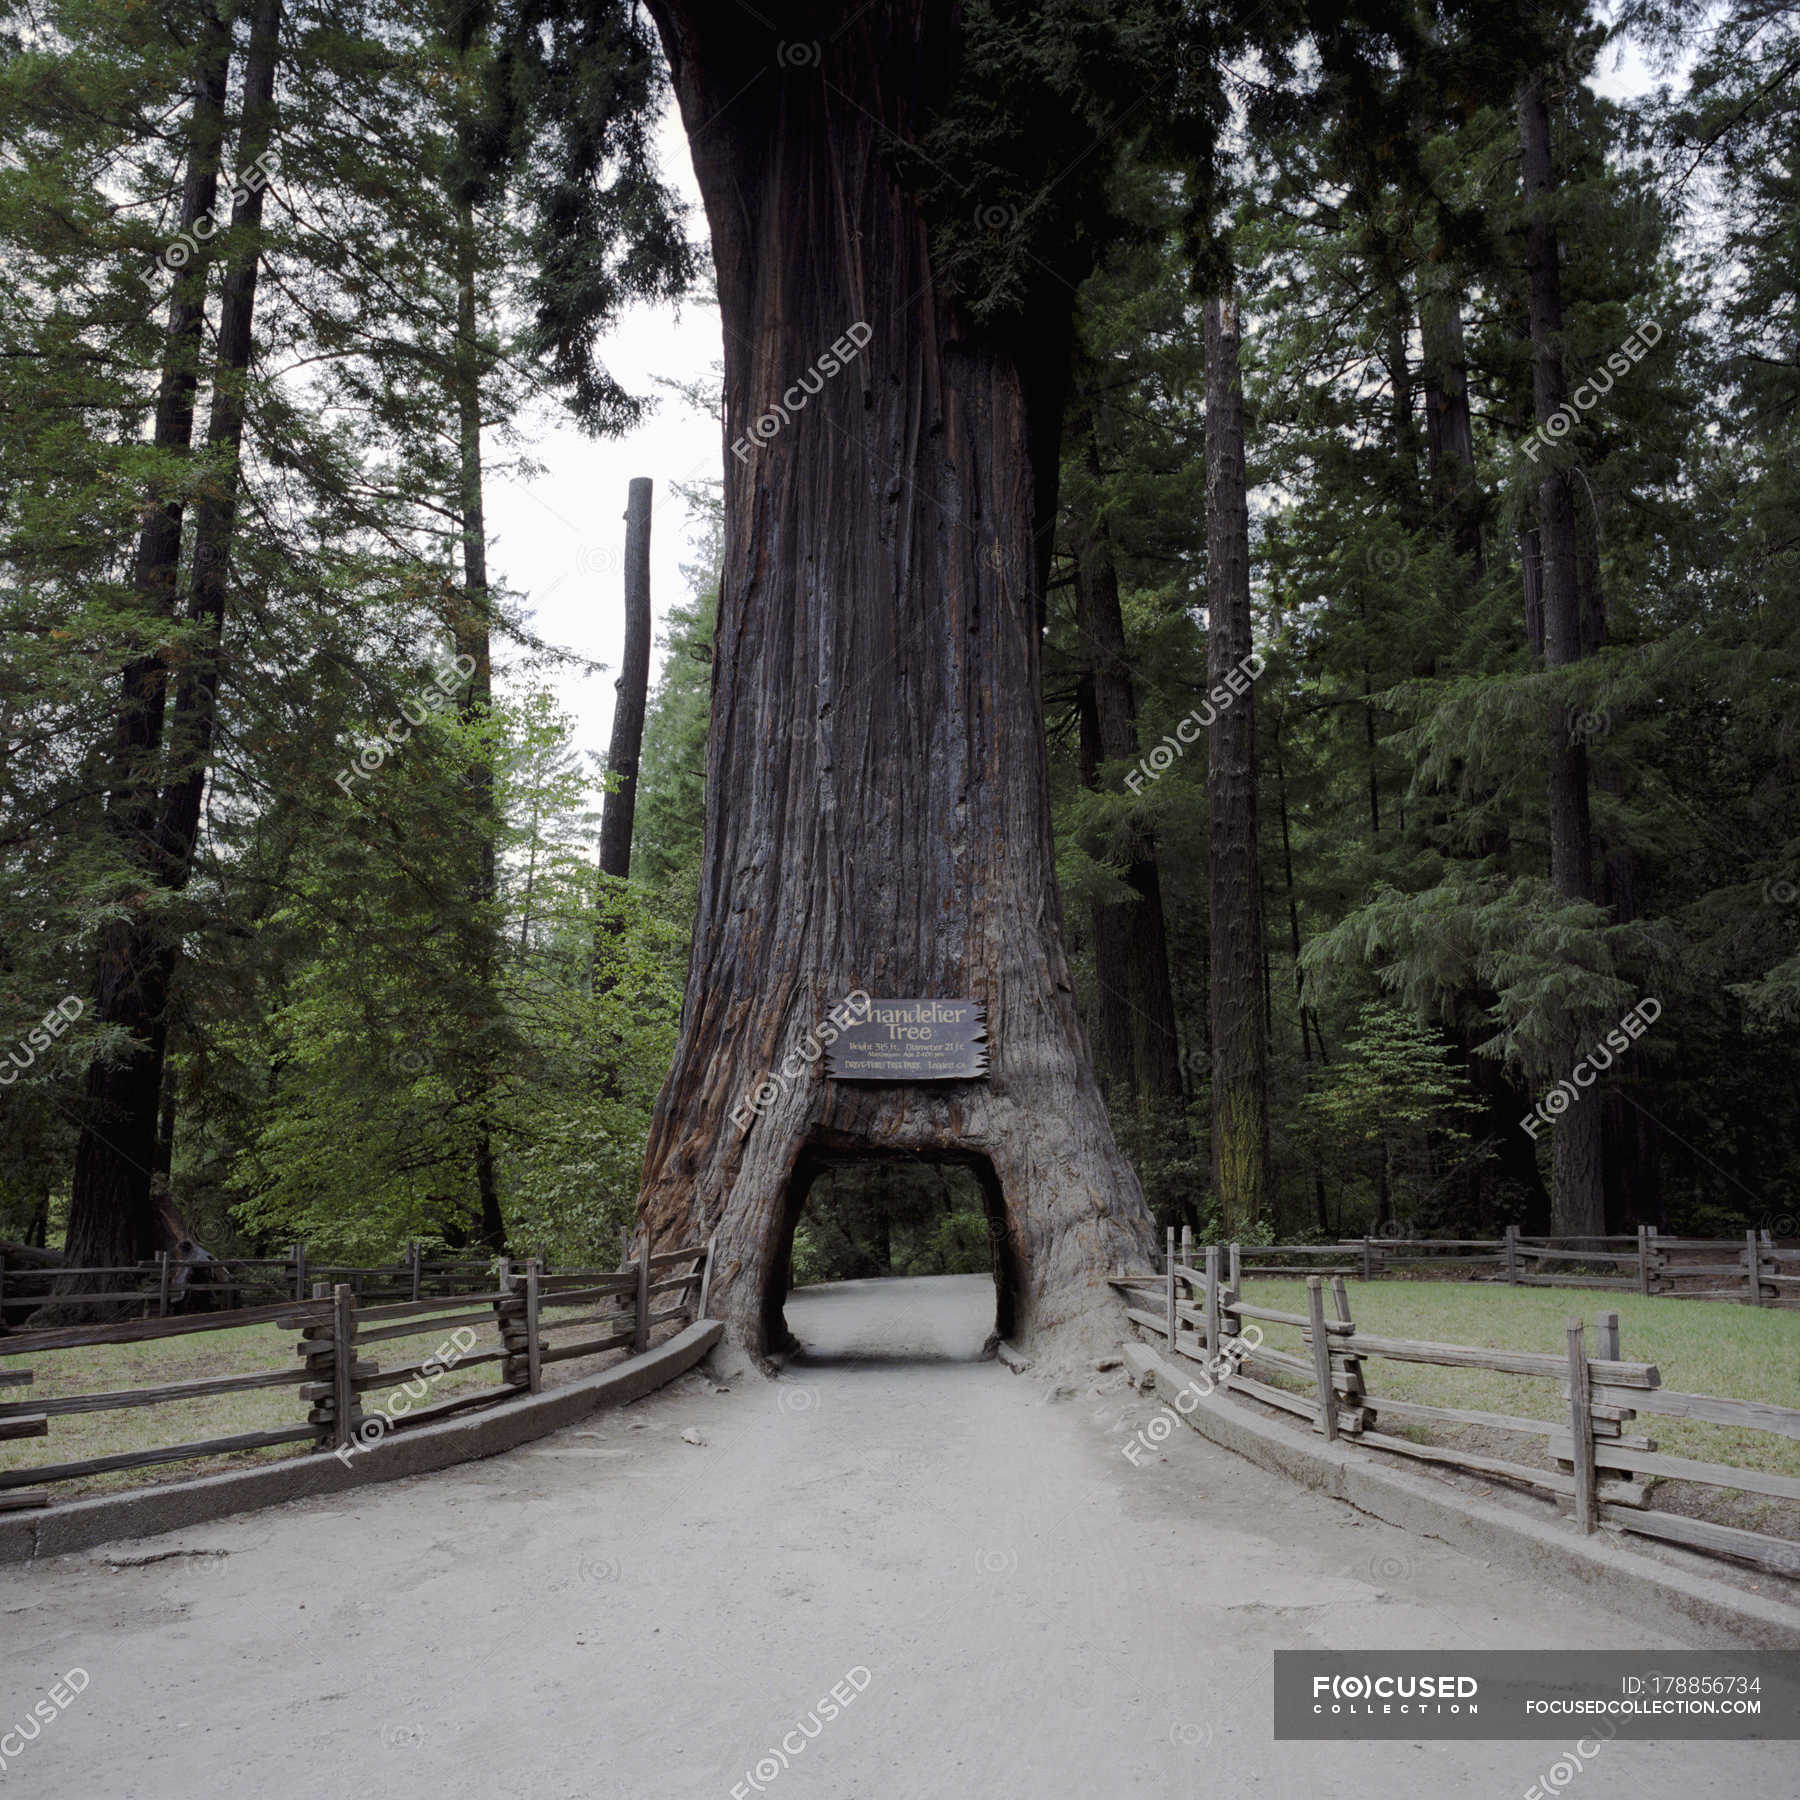 Chandelier Tree With Archway On Country, Chandelier Tree Leggett Canada